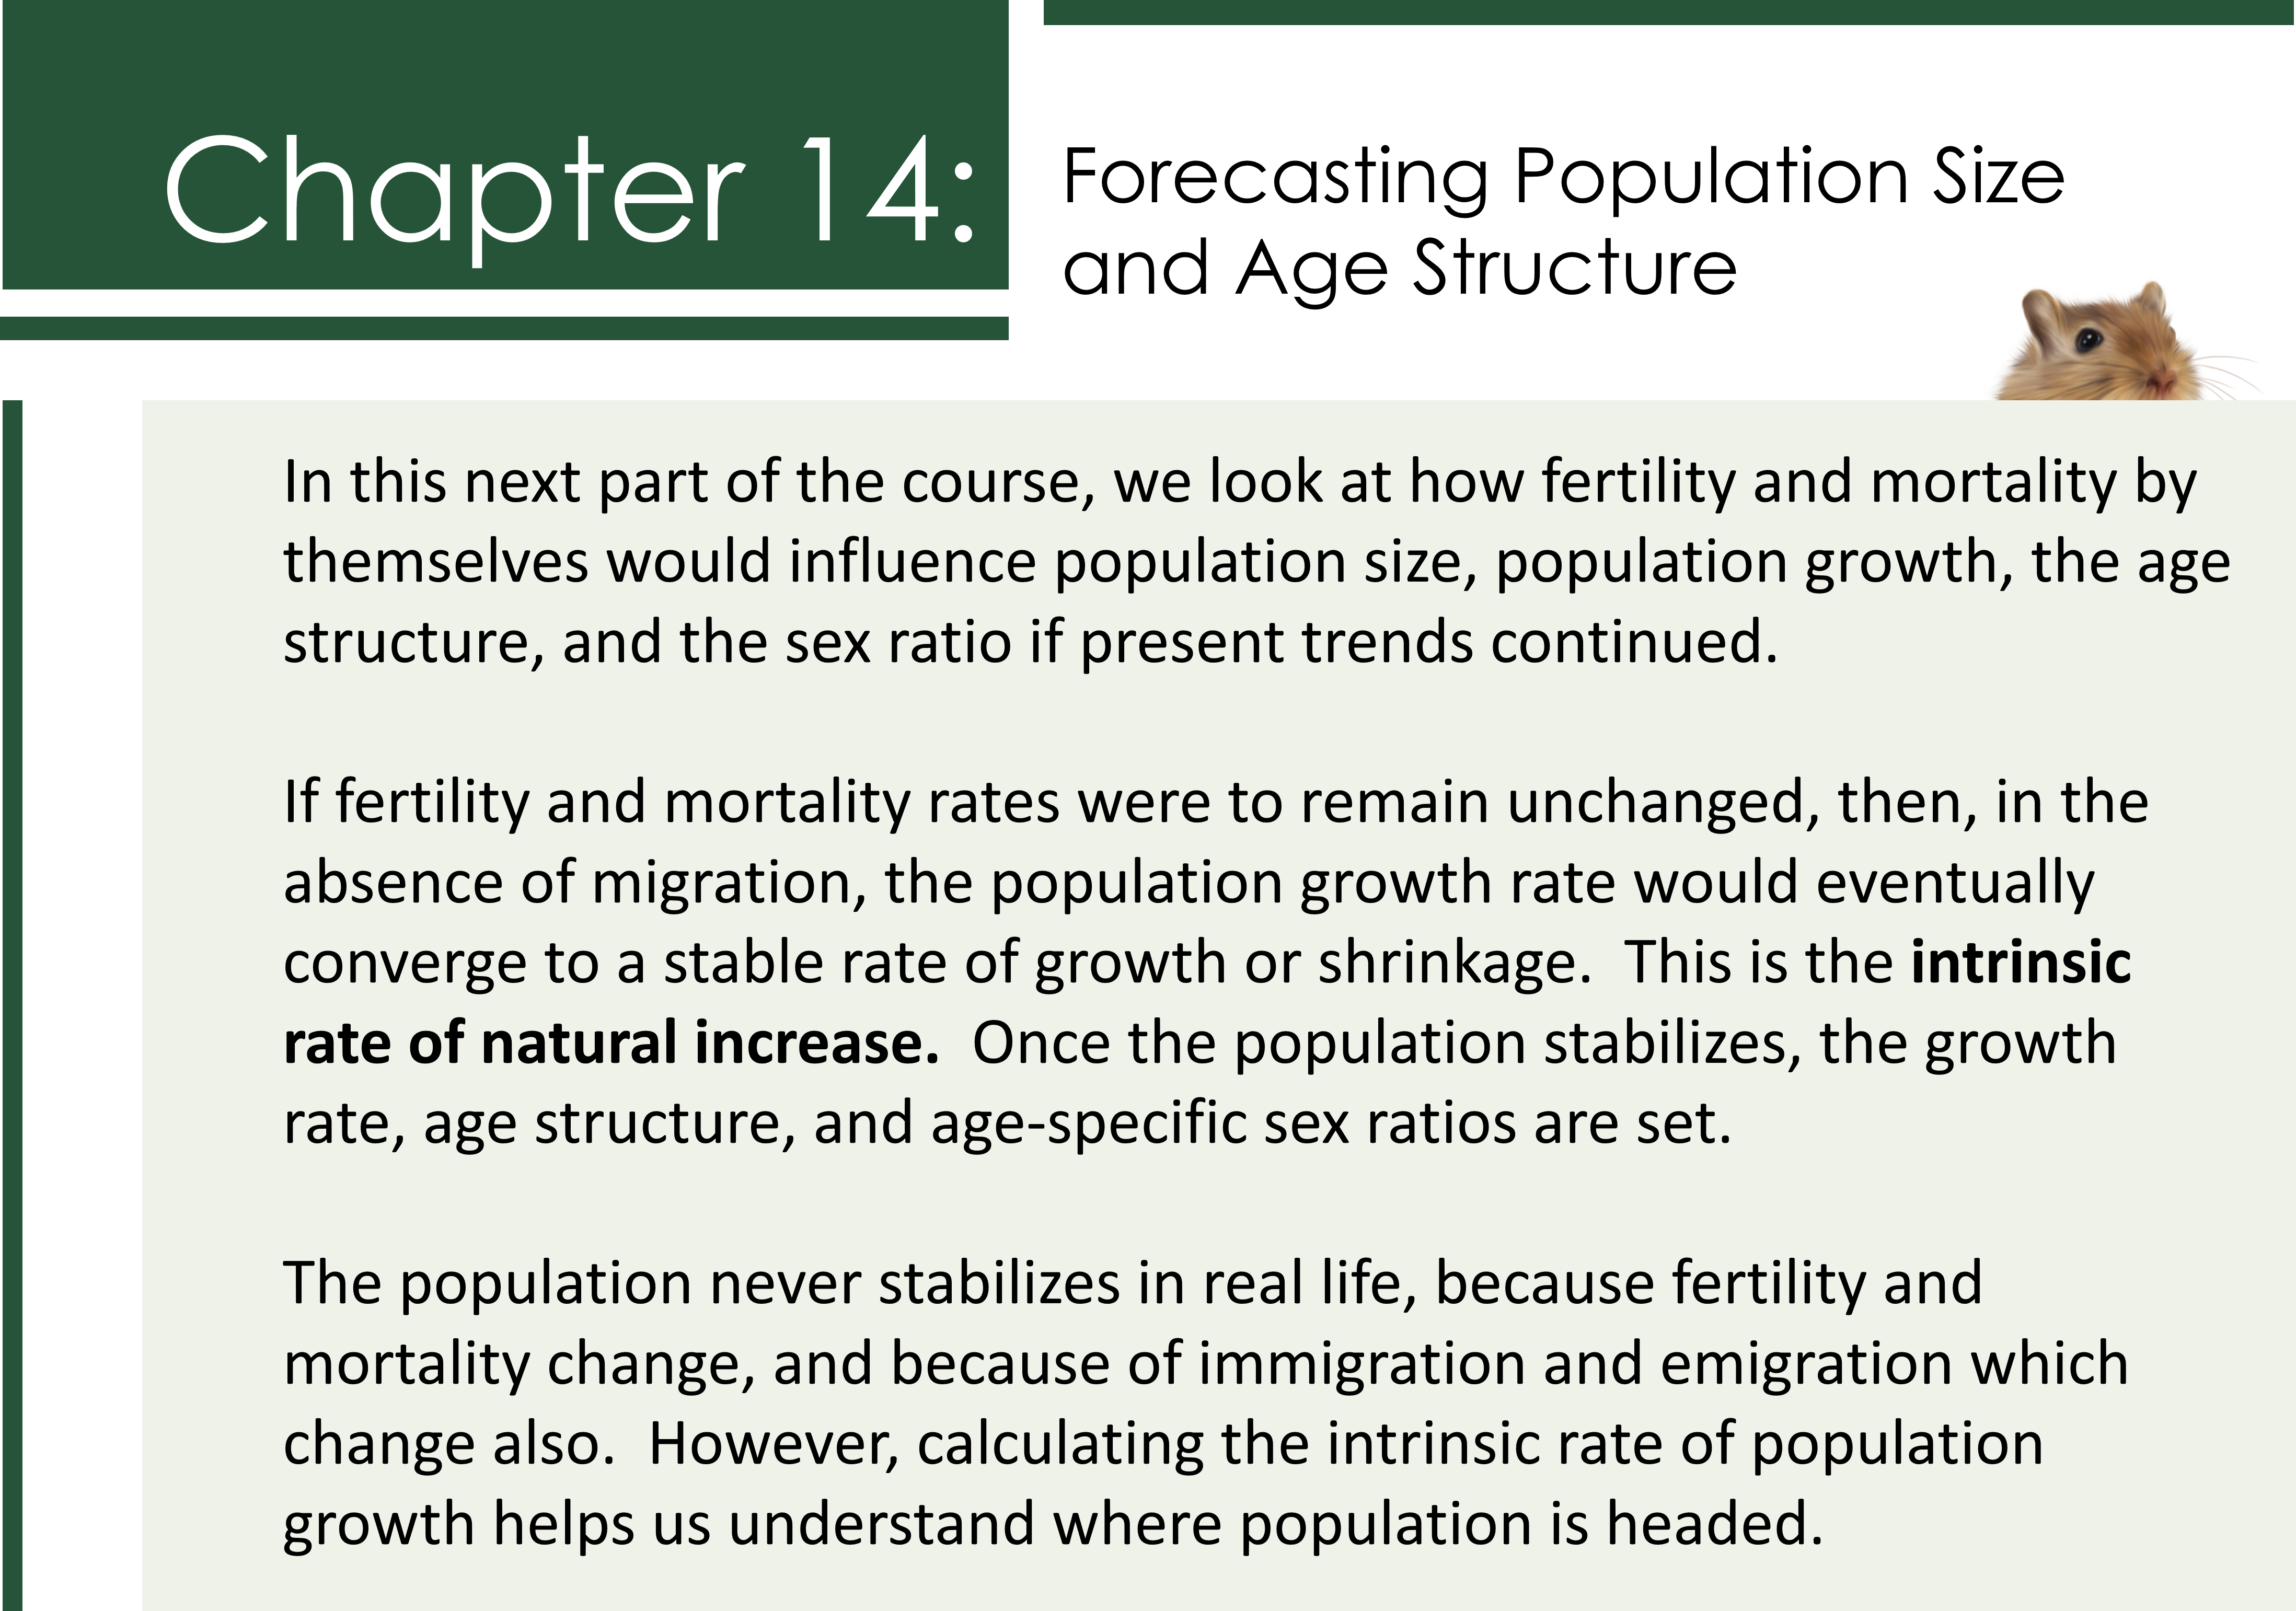 Forecasting Population Size and Age Structure. In this next part of the course, we look at how fertility and mortality by themselves would influence population size, population growth, the age structure, and the sex ratio if present trends continued. If fertility and mortality rates were to remain unchanged, then, in the absence of migration, the population growth rate would eventually converge to a stable rate of growth or shrinkage. This is the intrinsic rate of natural increase. Once the population stabilizes, the growth rate, age structure, and age-specific sex ratios are set. The population never stabilizes in real life, because fertility and mortality change, and because of immigration and emigration which change also. However, calculating the intrinsic rate of population growth helps us understand where population is headed.